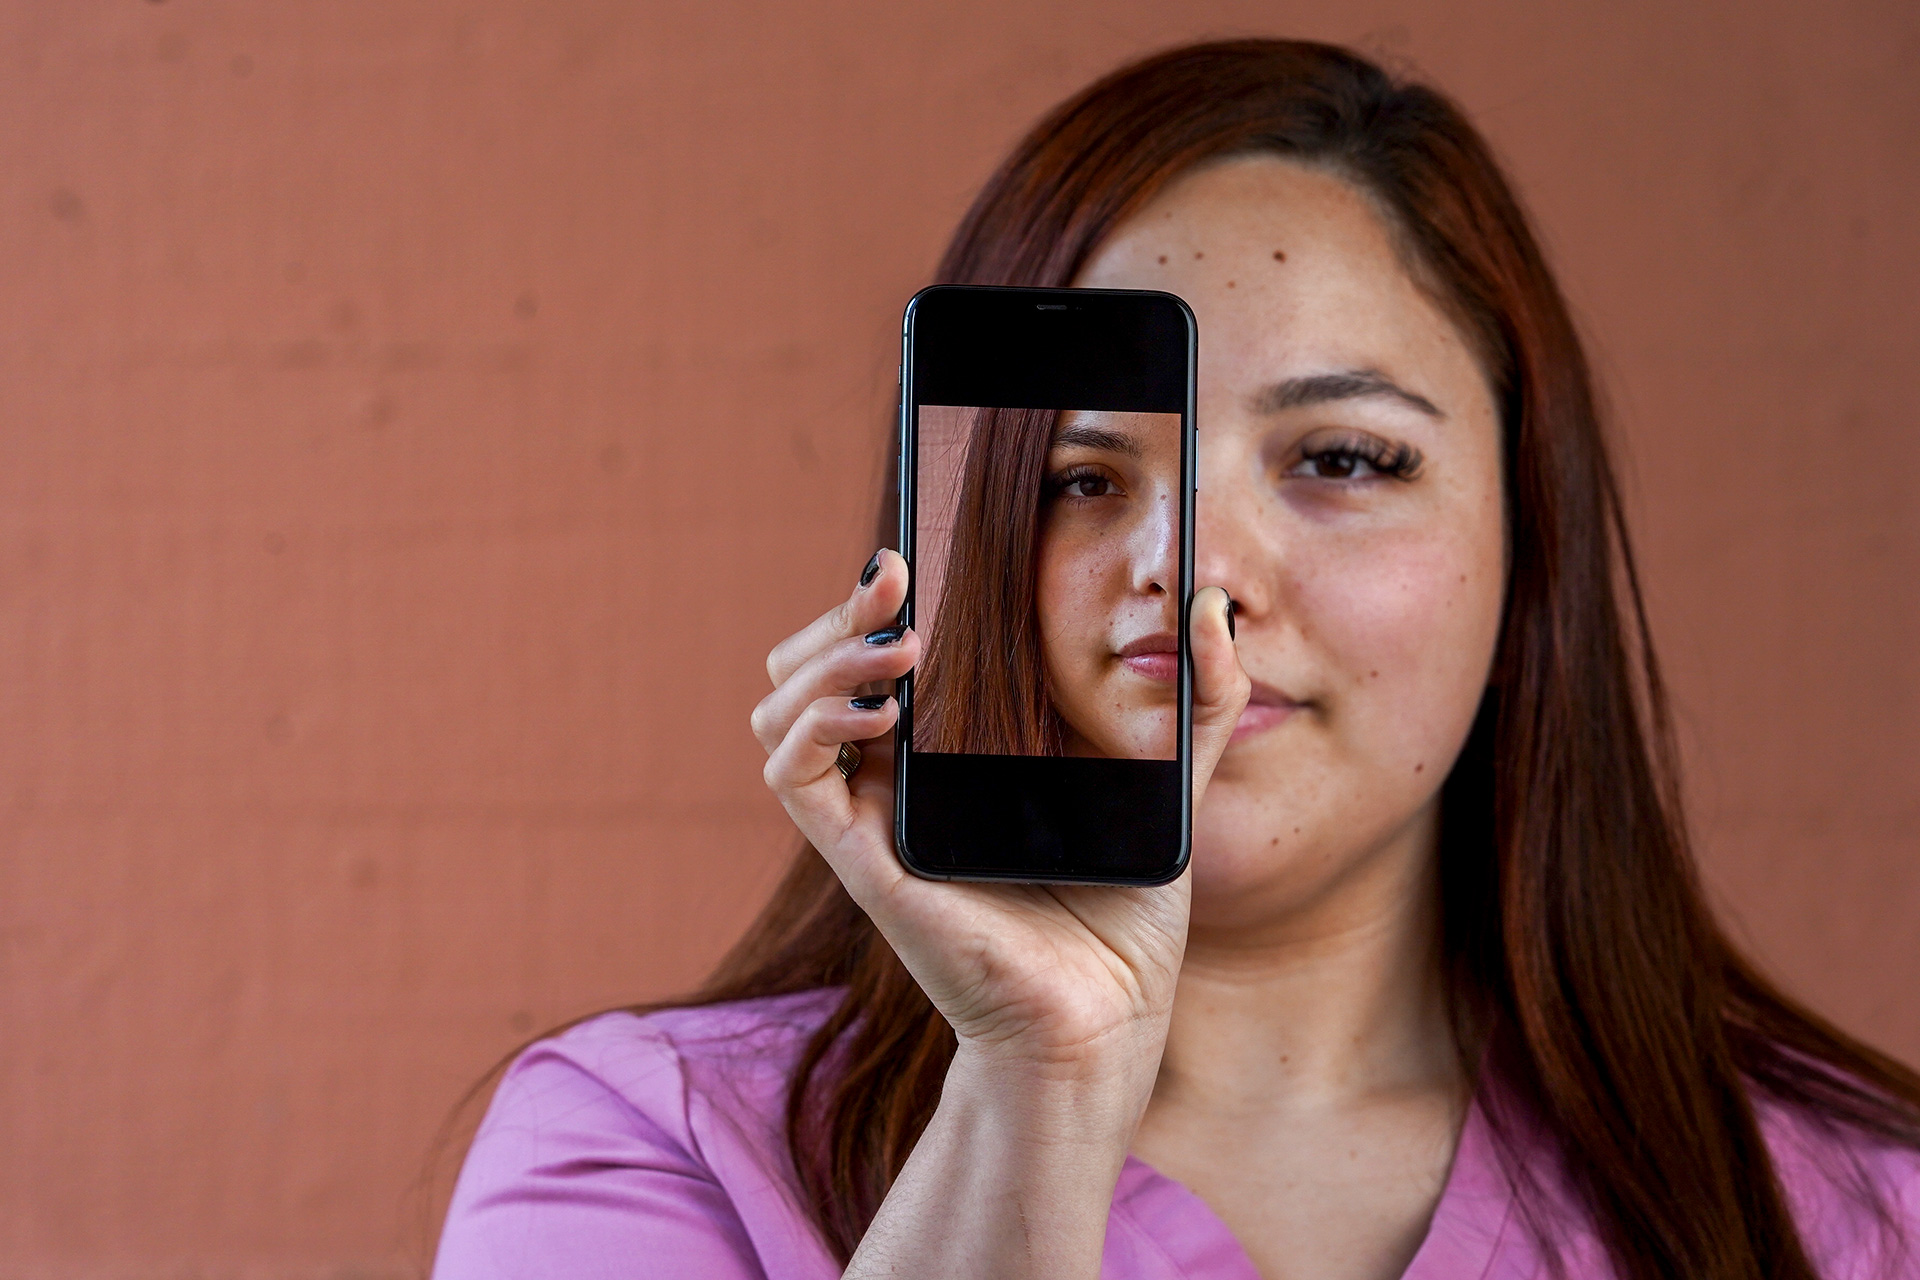 Natalie Torres holds an iPhone in front of her face